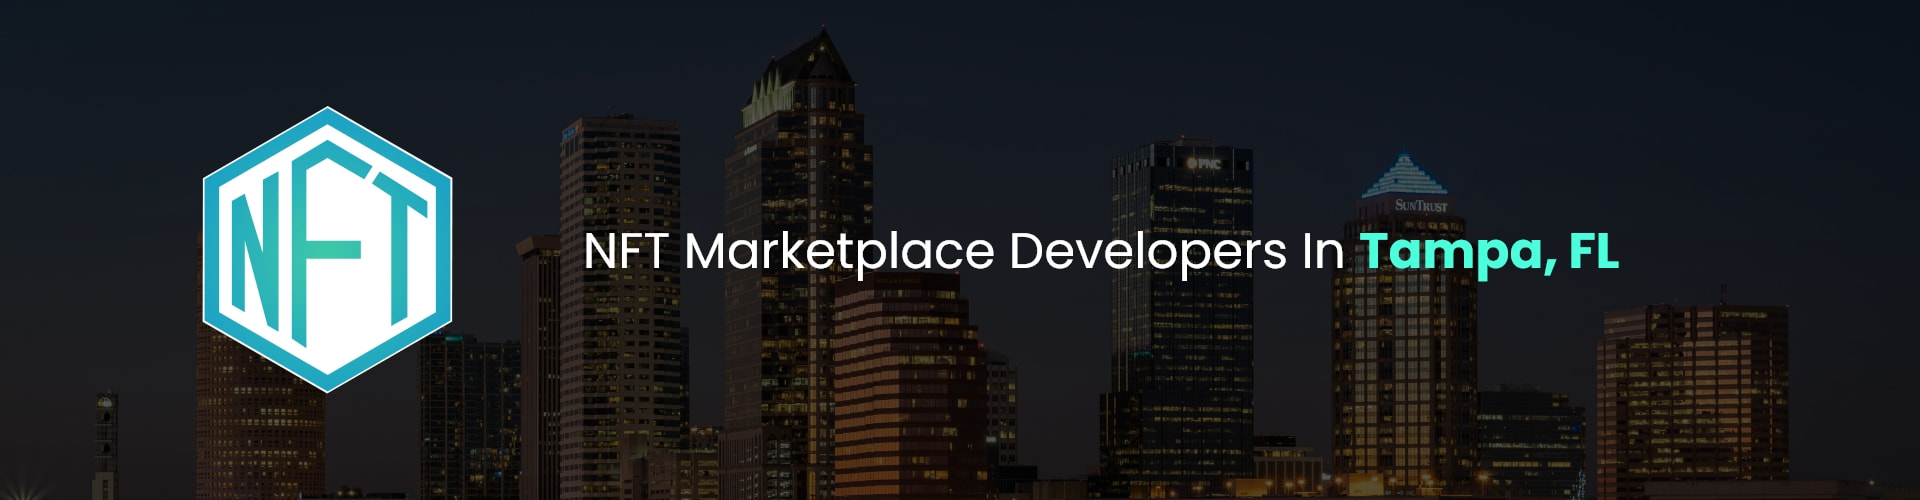 hire nft marketplace developers in tampa